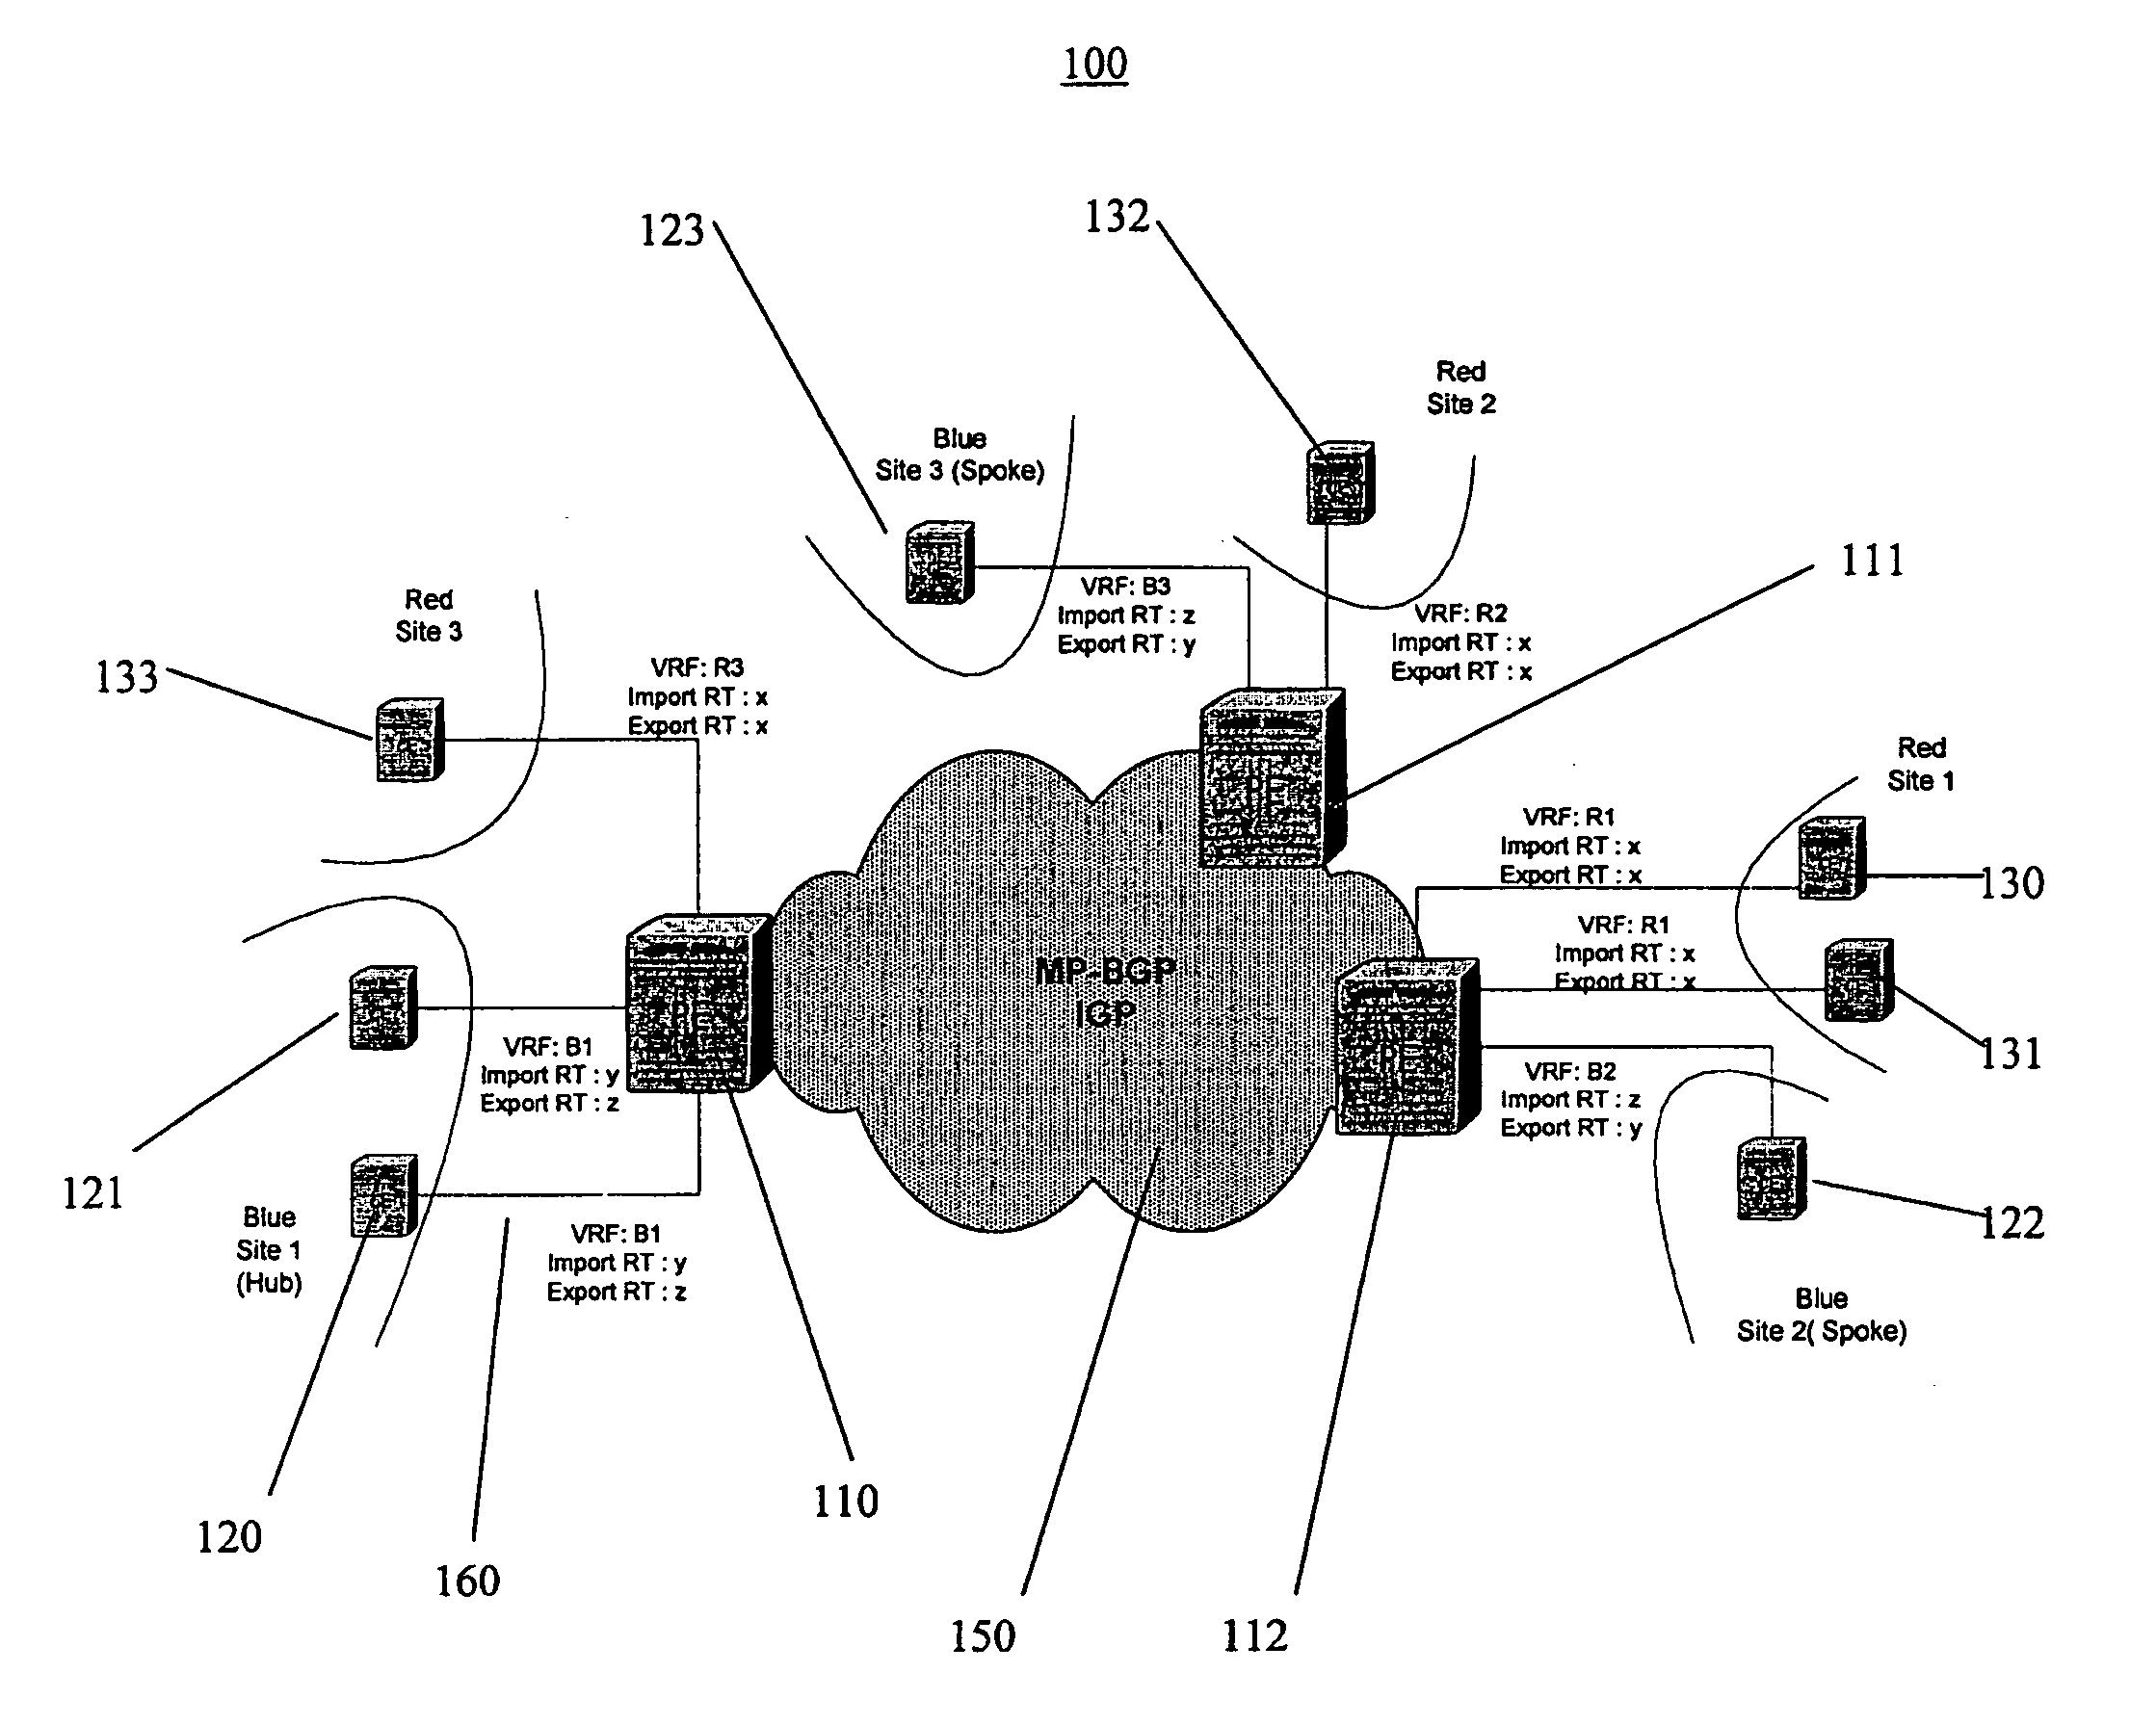 Method and system for virtual private network connectivity verification